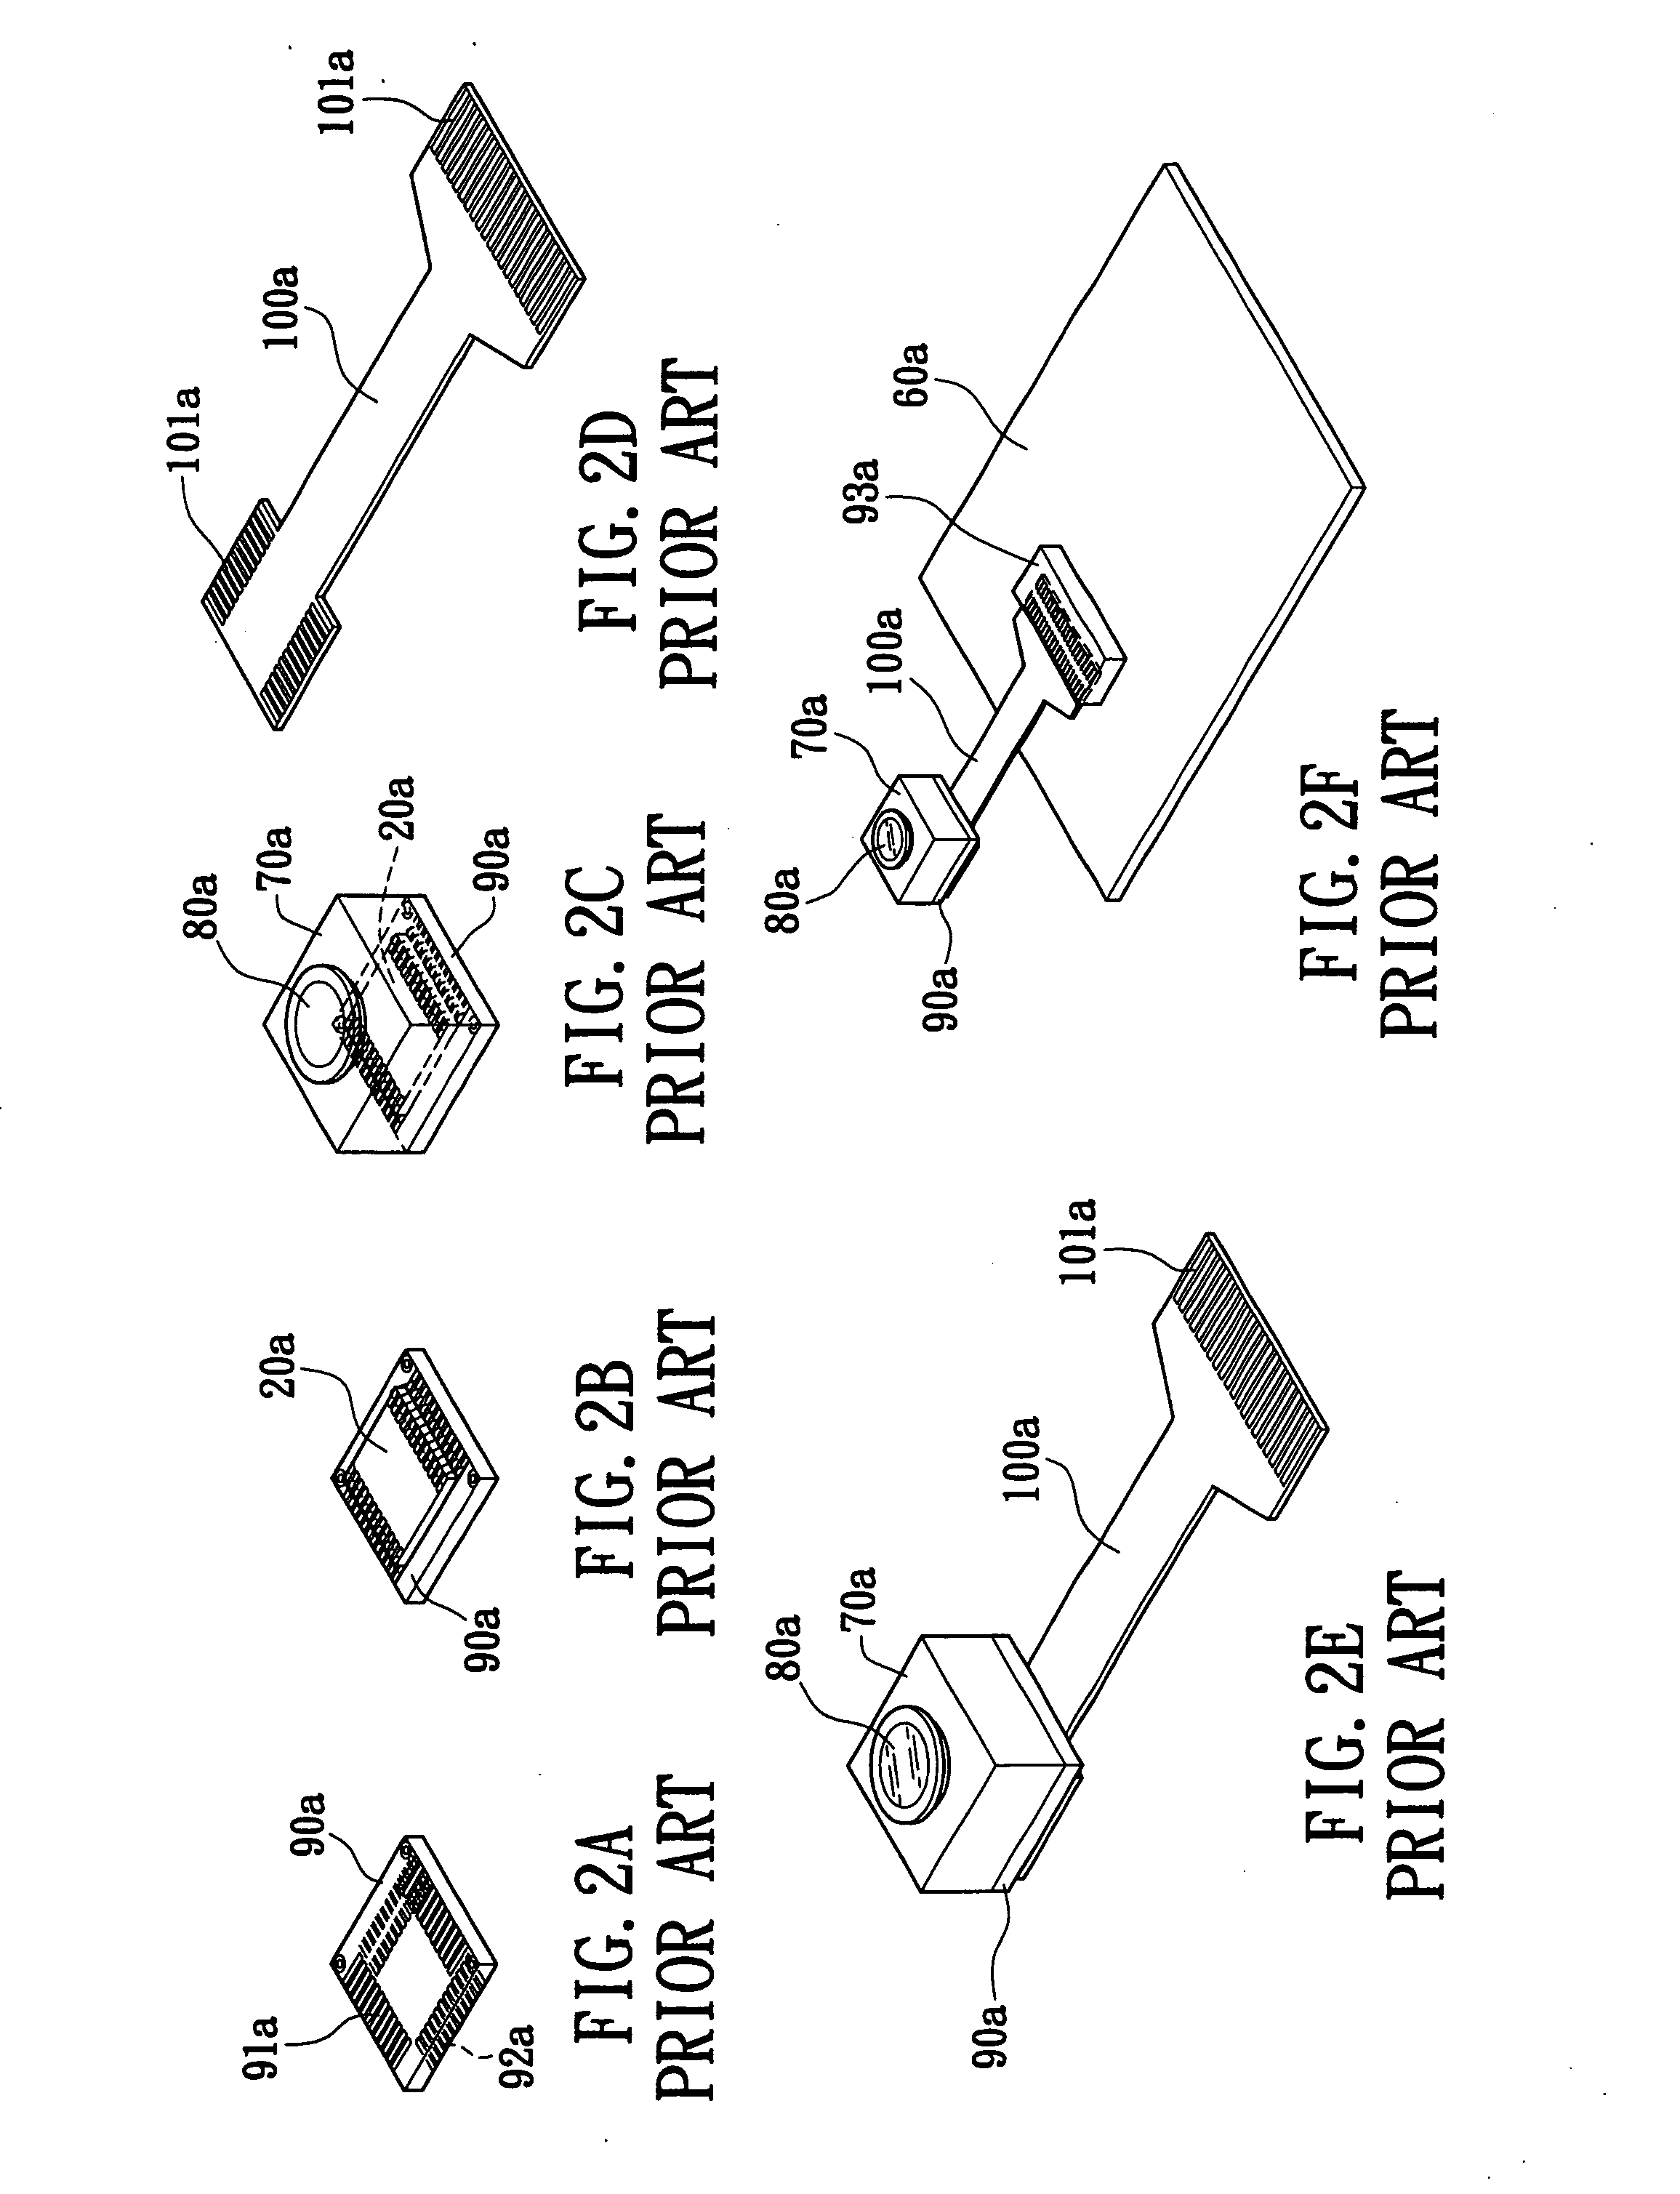 Chip package substrate having soft circuit board and method for fabricating the same